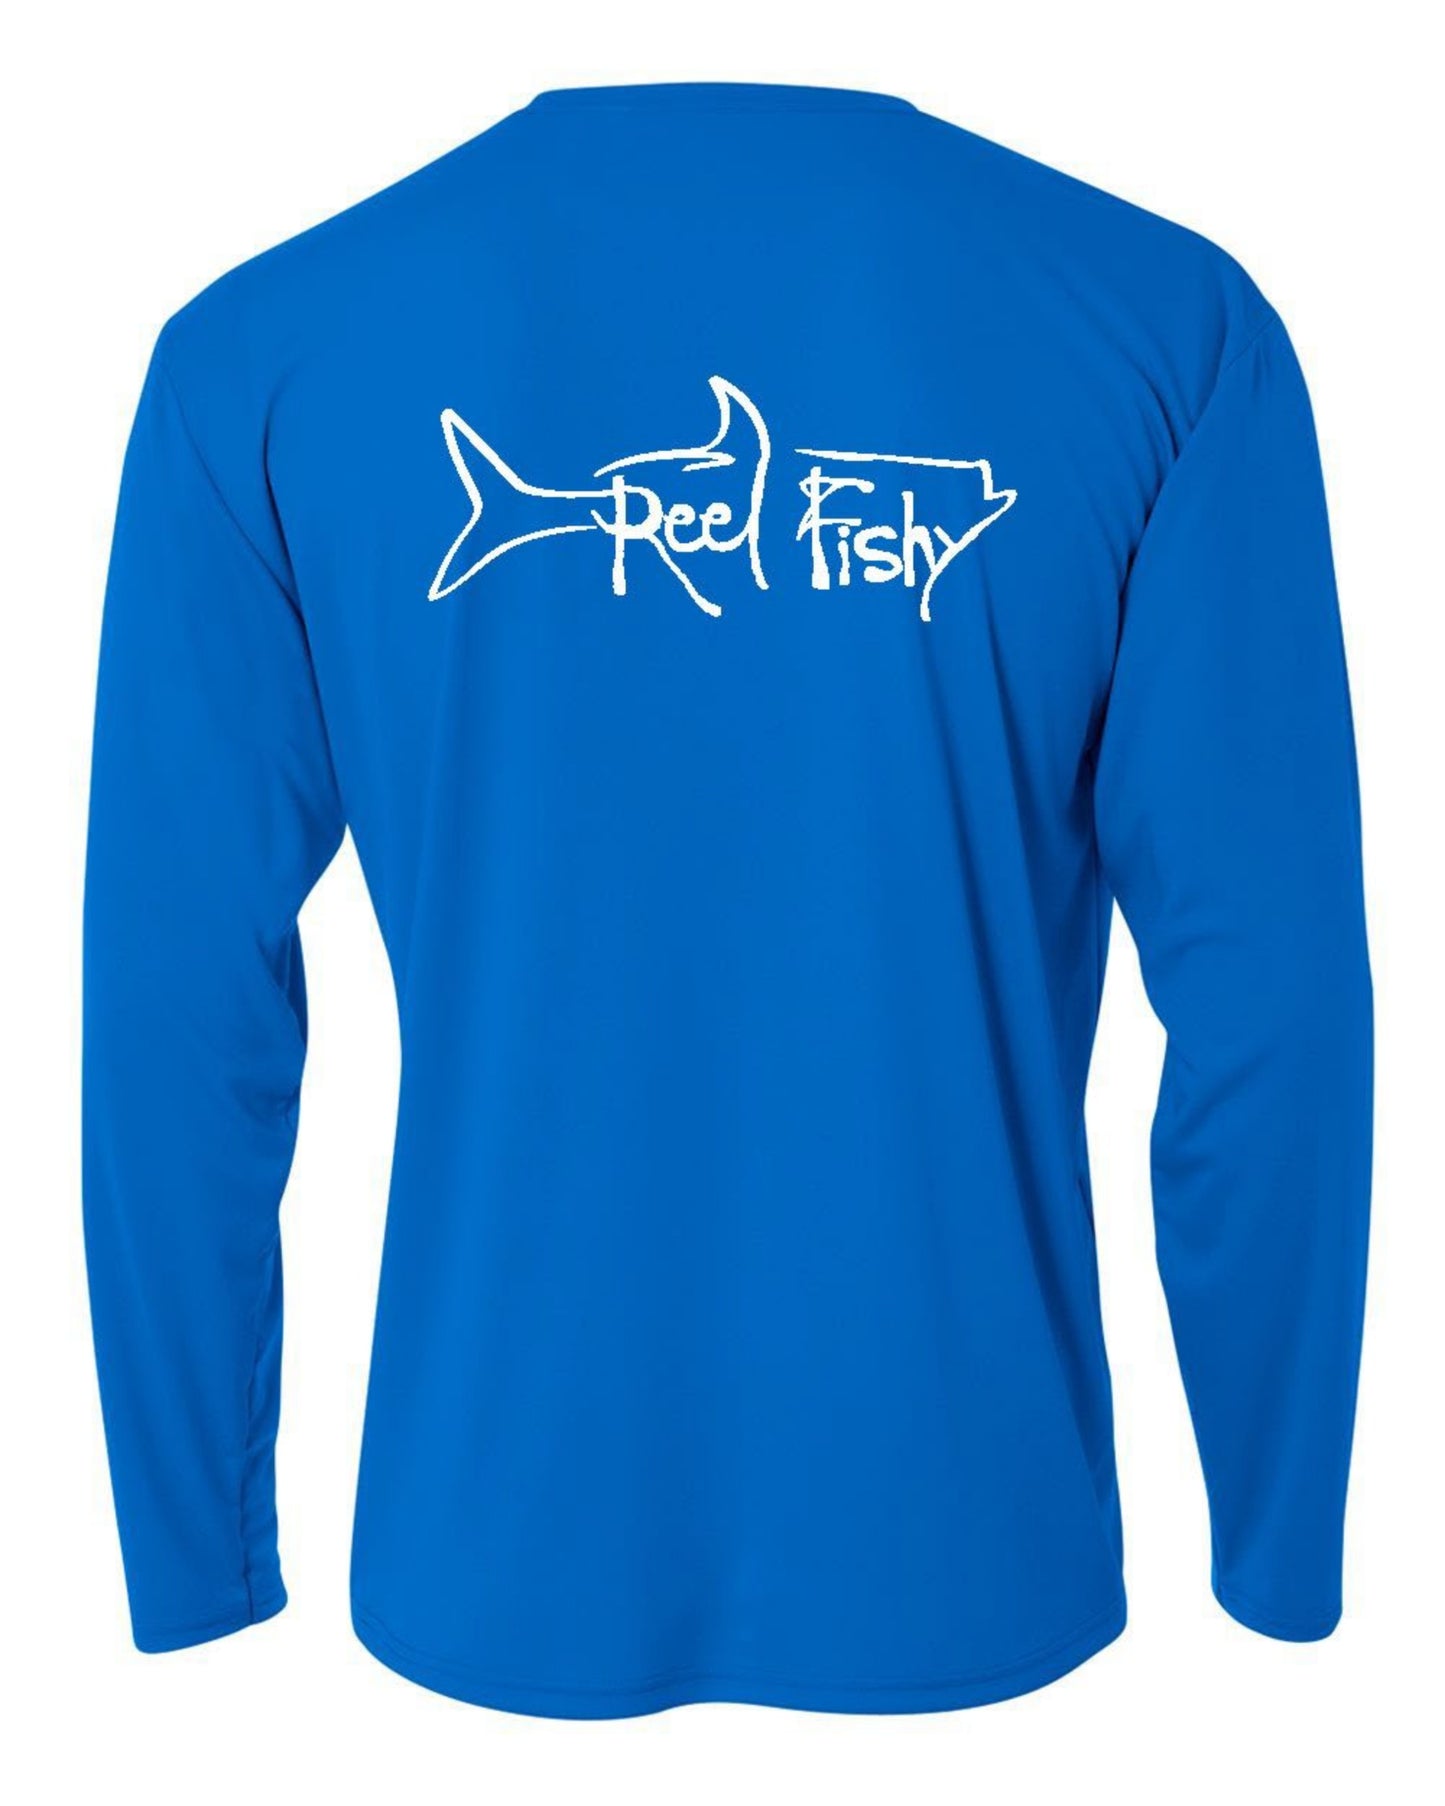 Youth Performance Dry-Fit Tarpon Fishing Shirts with Sun Protection by Reel Fishy Apparel - Long Sleeve Royal